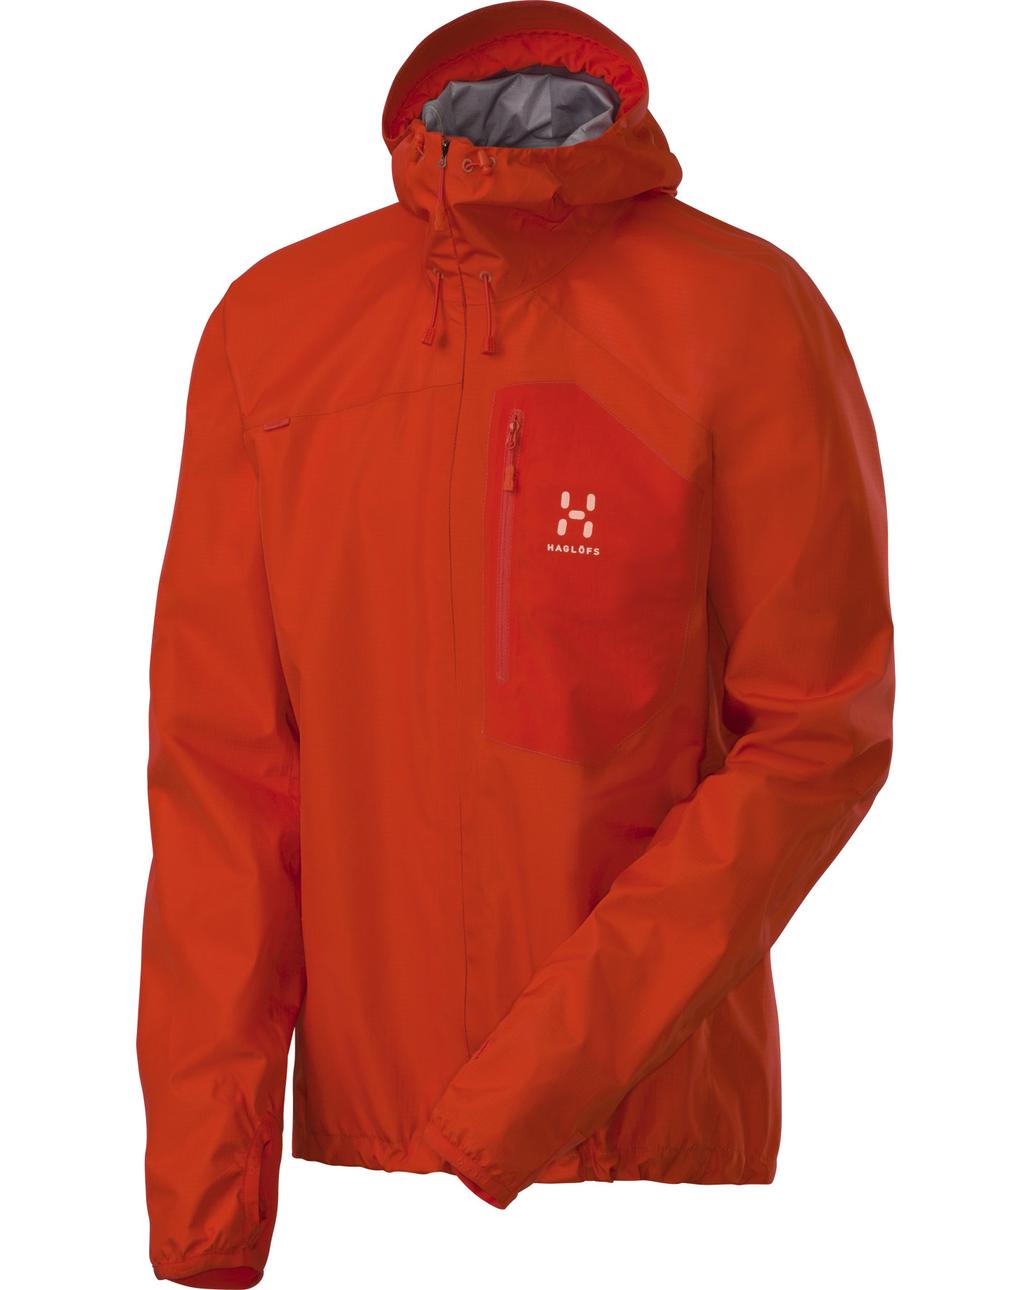 GRAM JACKET/ GRAM Q JACKET Revolutionary 3-layer shell jacket with outstanding breathability and packability for wide range of high pulse activities.